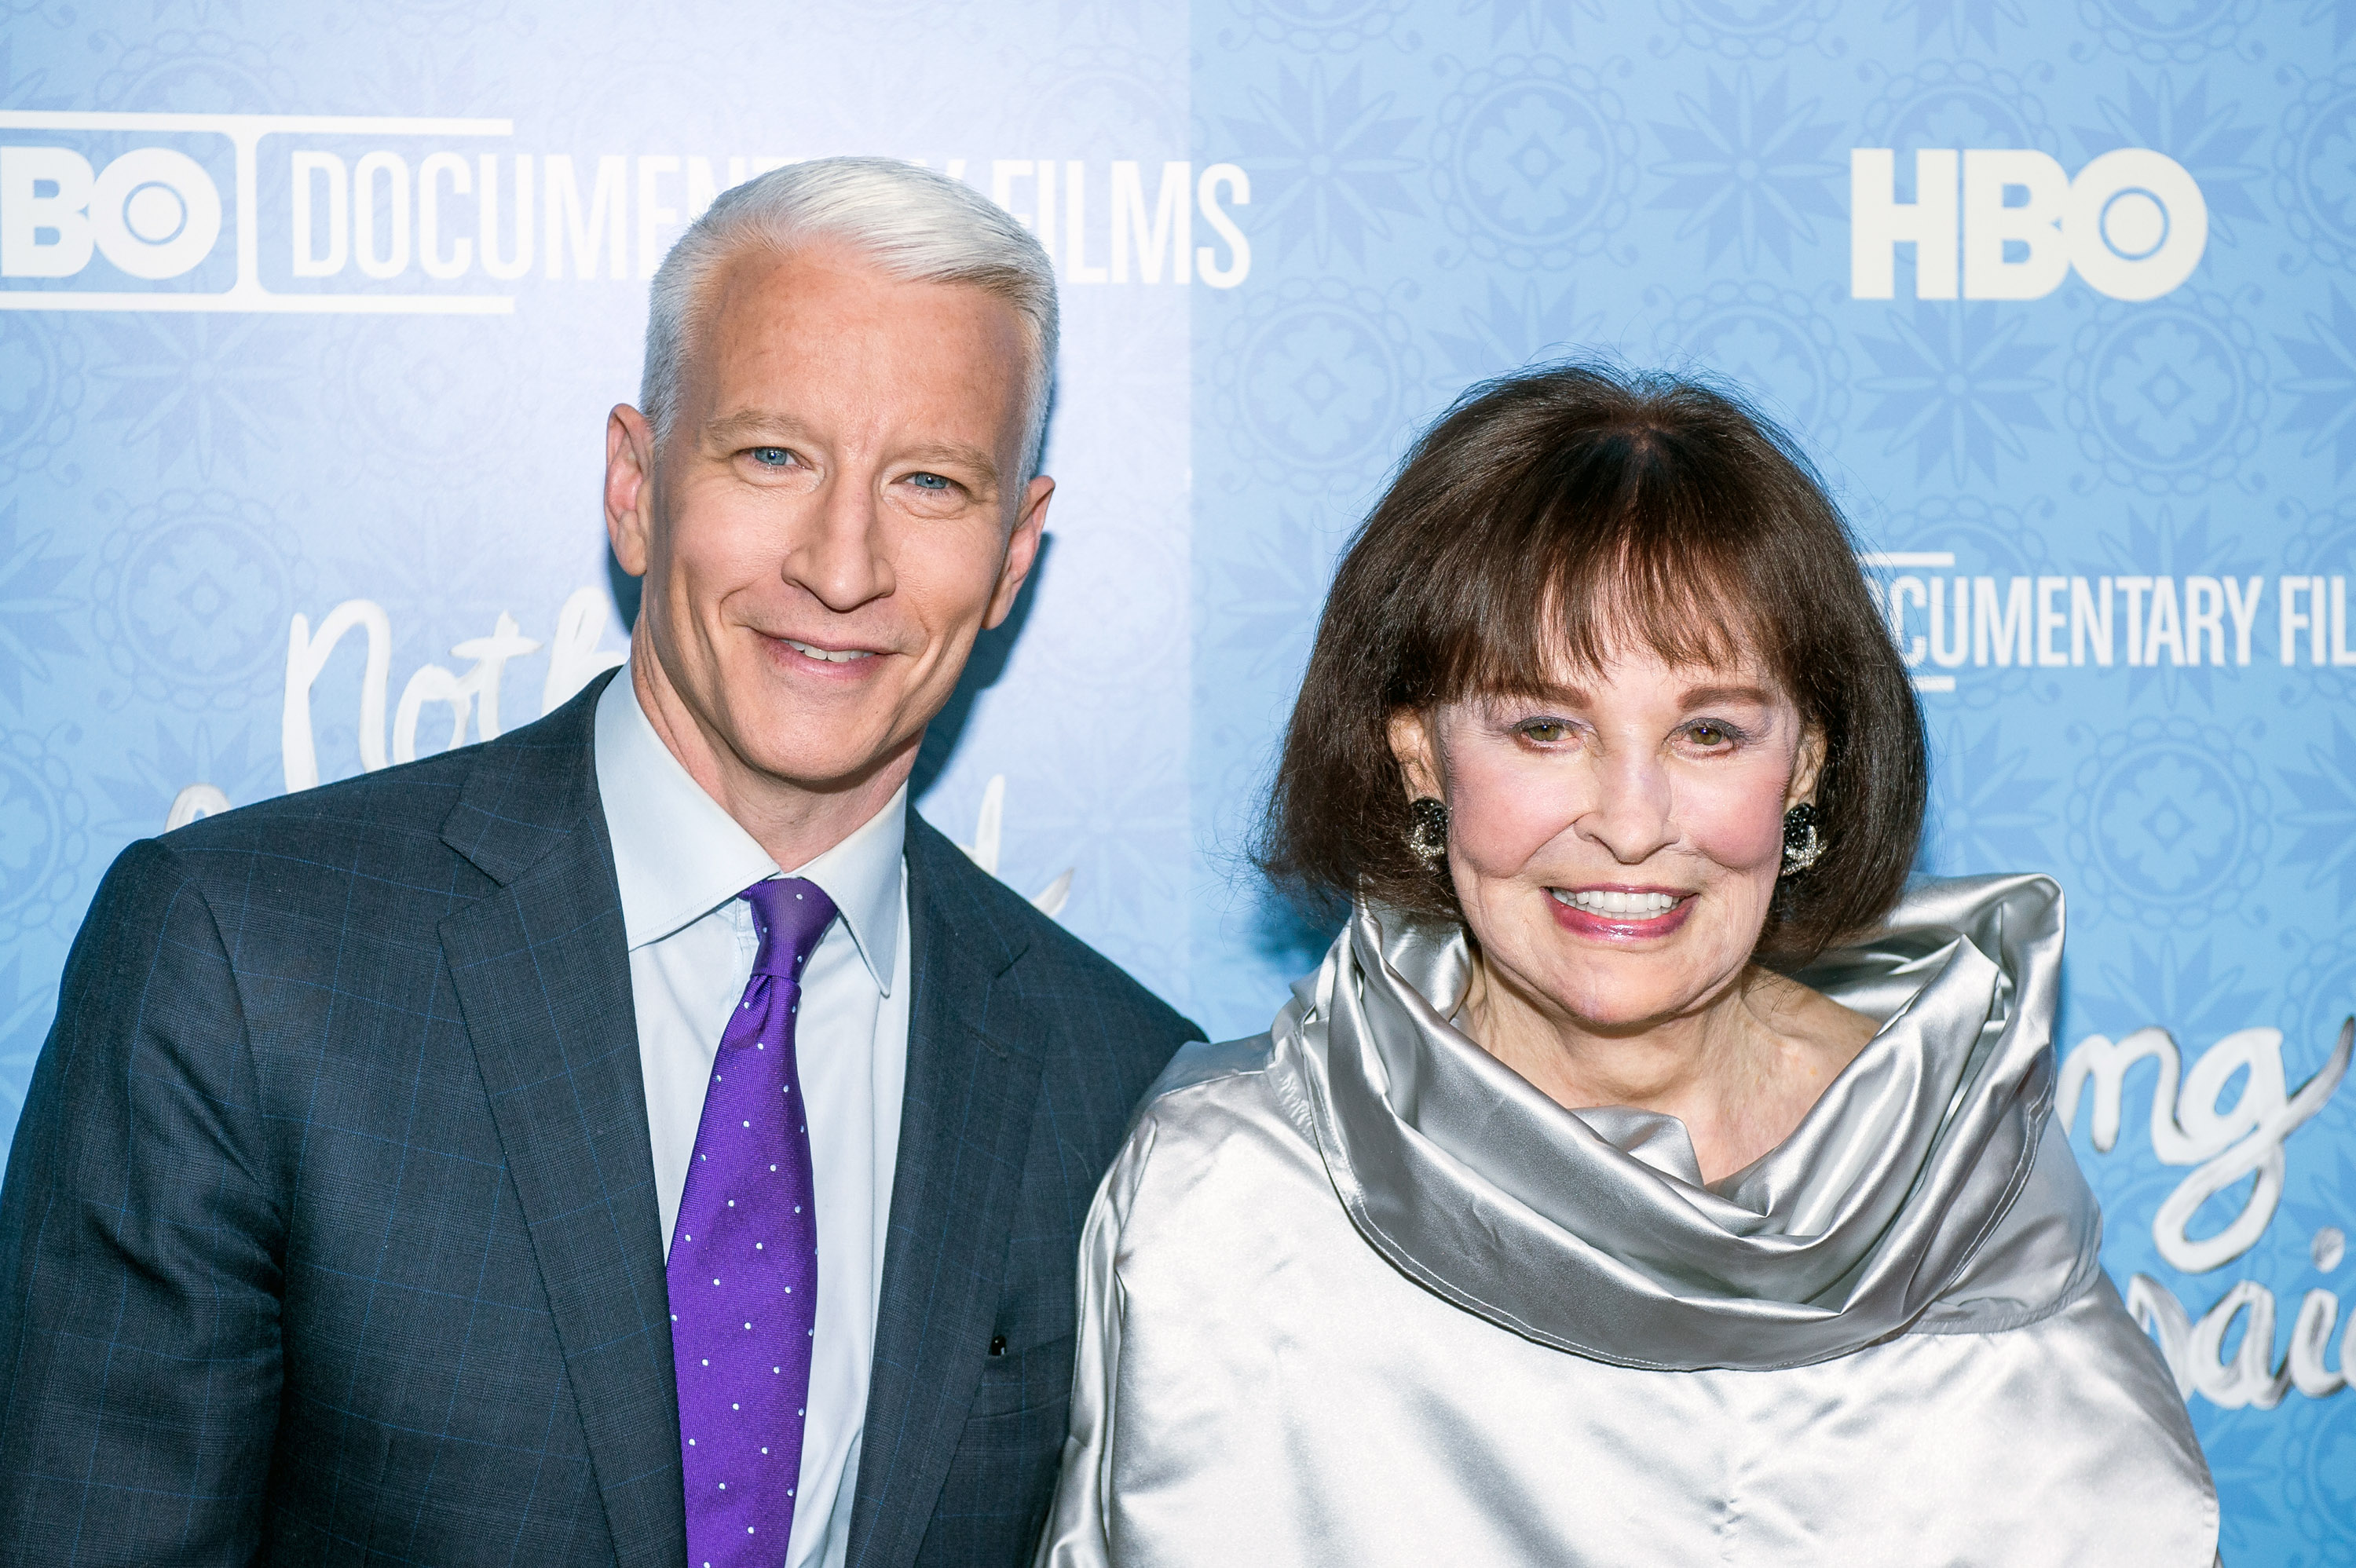 Anderson Cooper and his mother Gloria Vanderbilt on April 4, 2016 in New York City. | Source: Getty Images